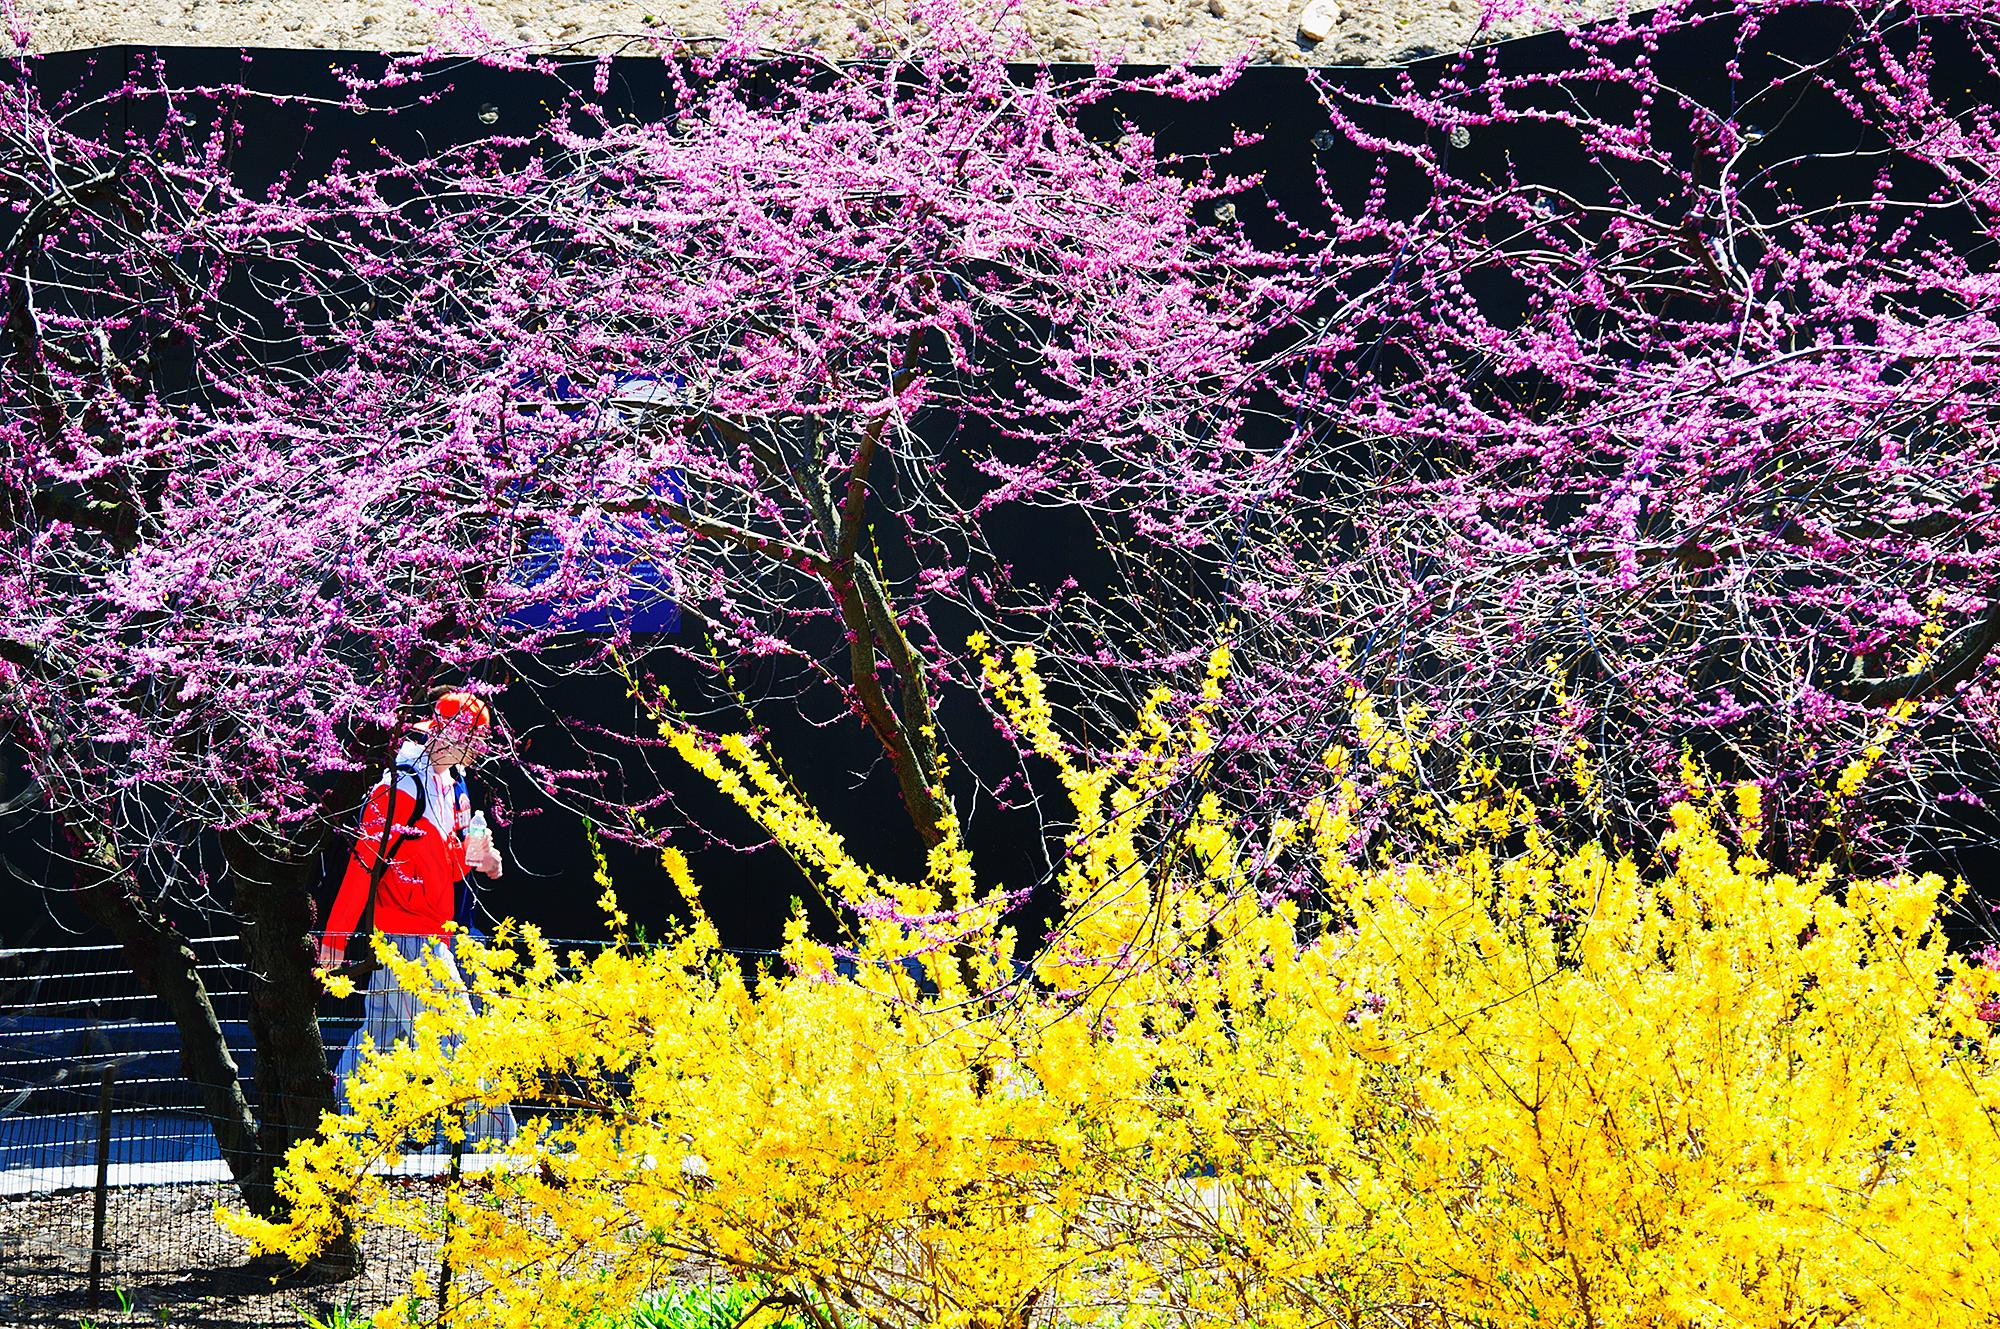 Mitchell Funk Landscape Photograph - Yellow Flowers  and Pink Flowers in Central Park